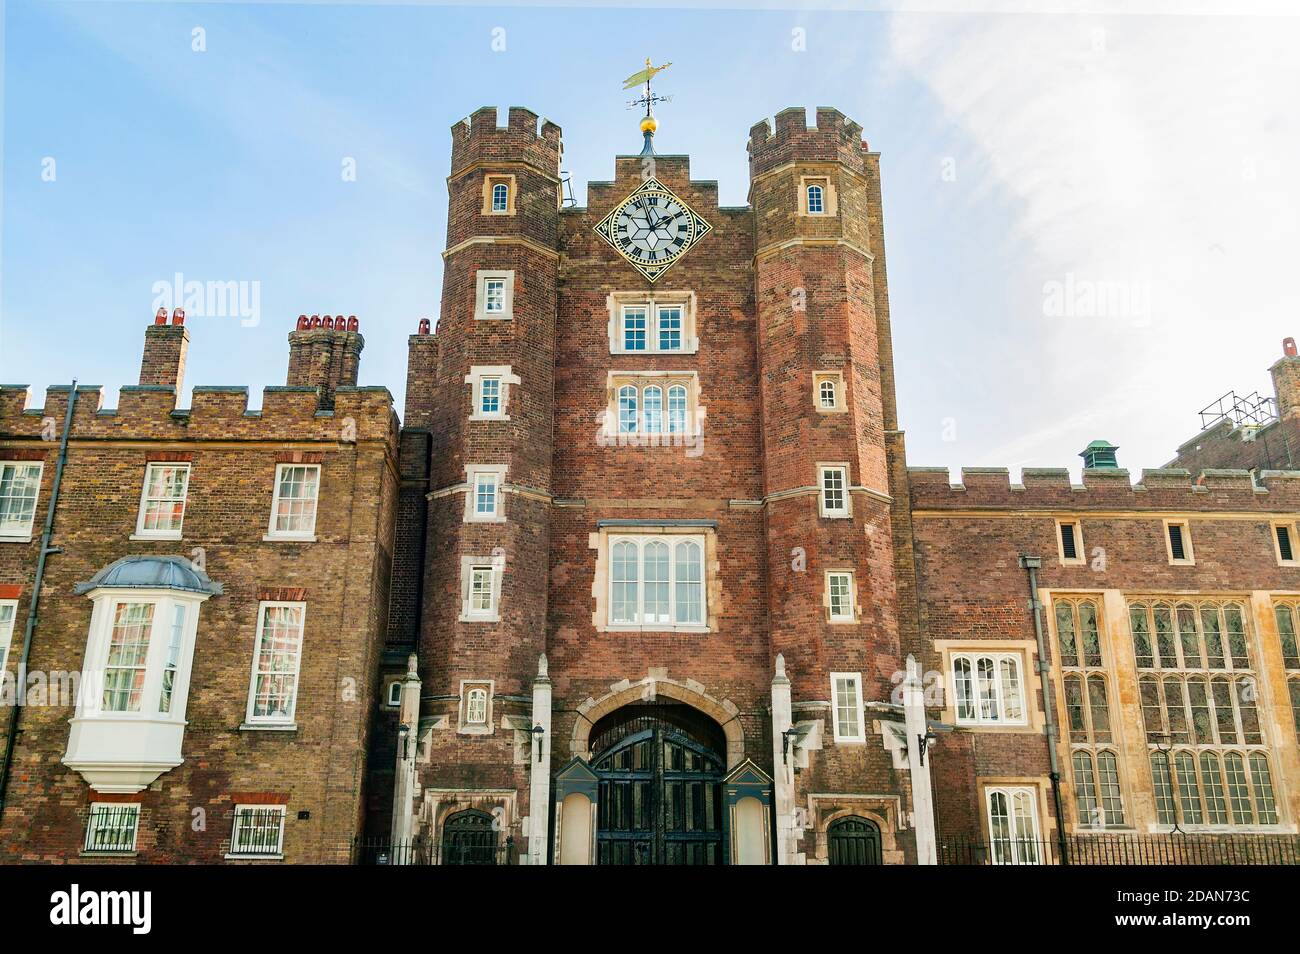 St James's Palace a Tudor royal castle built in 1536 in London England UK which is a popular travel destination tourist attraction landmark of the cit Stock Photo